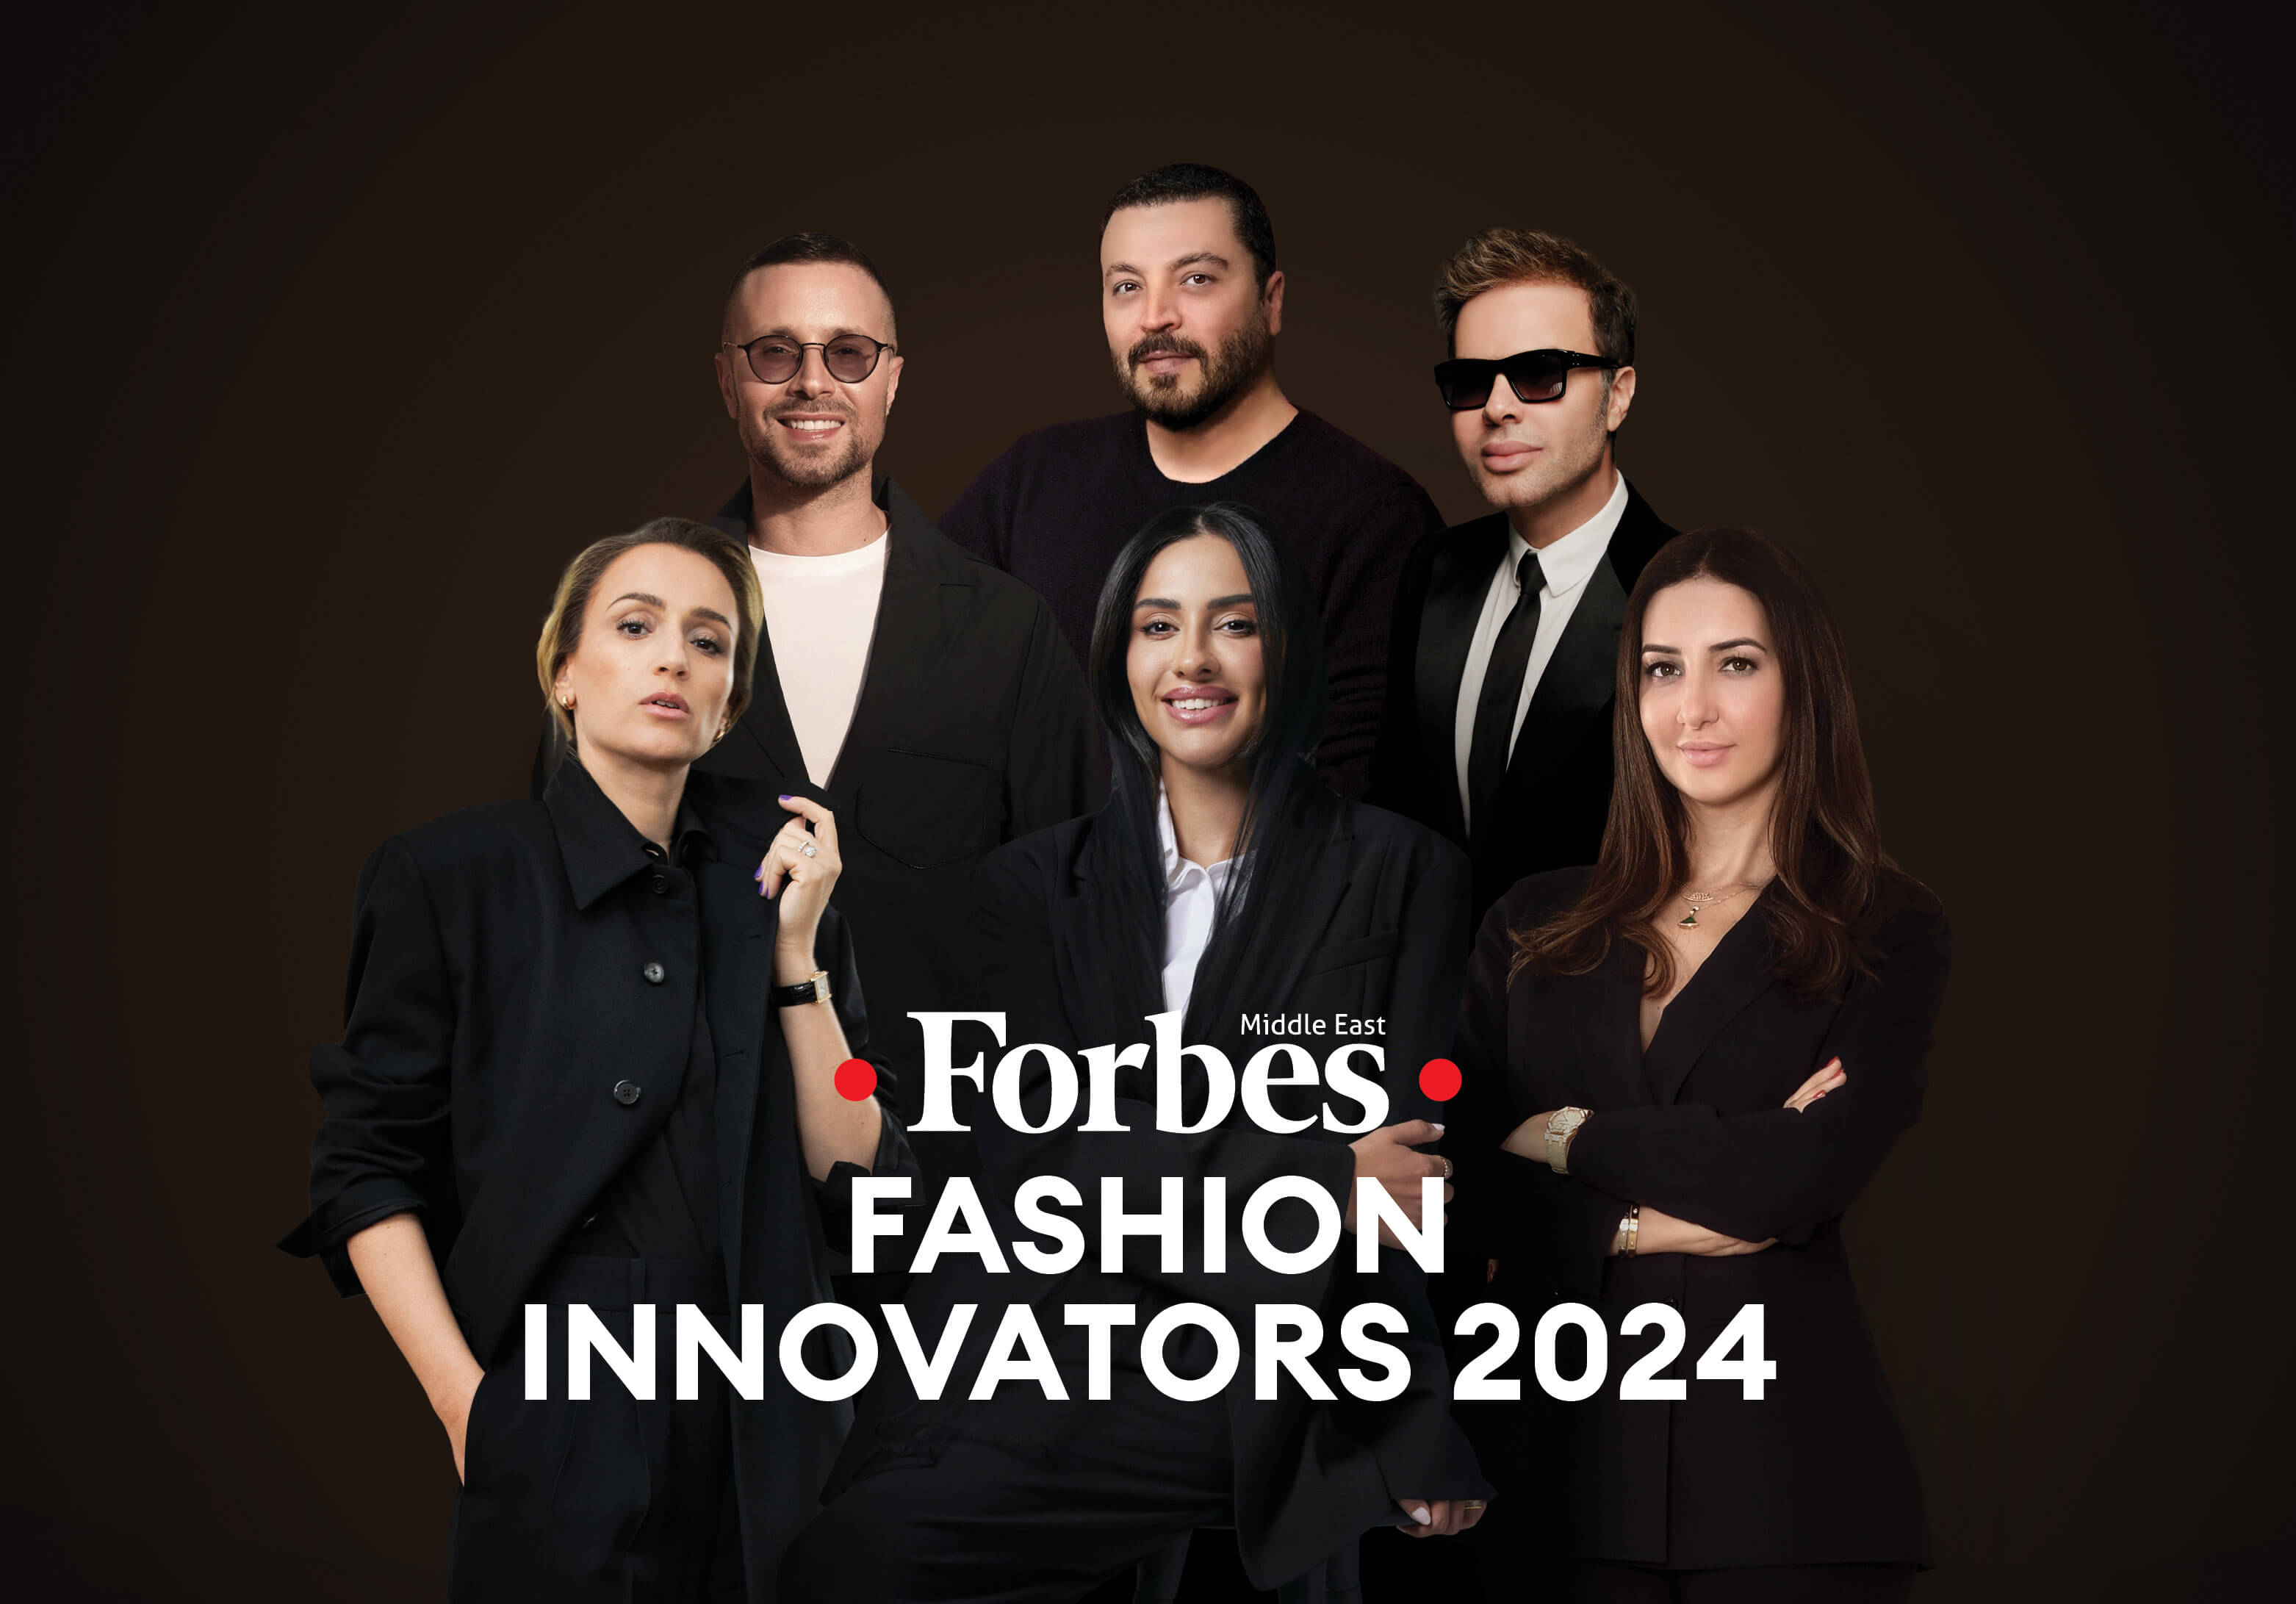 The Middle East's Fashion Innovators 2024